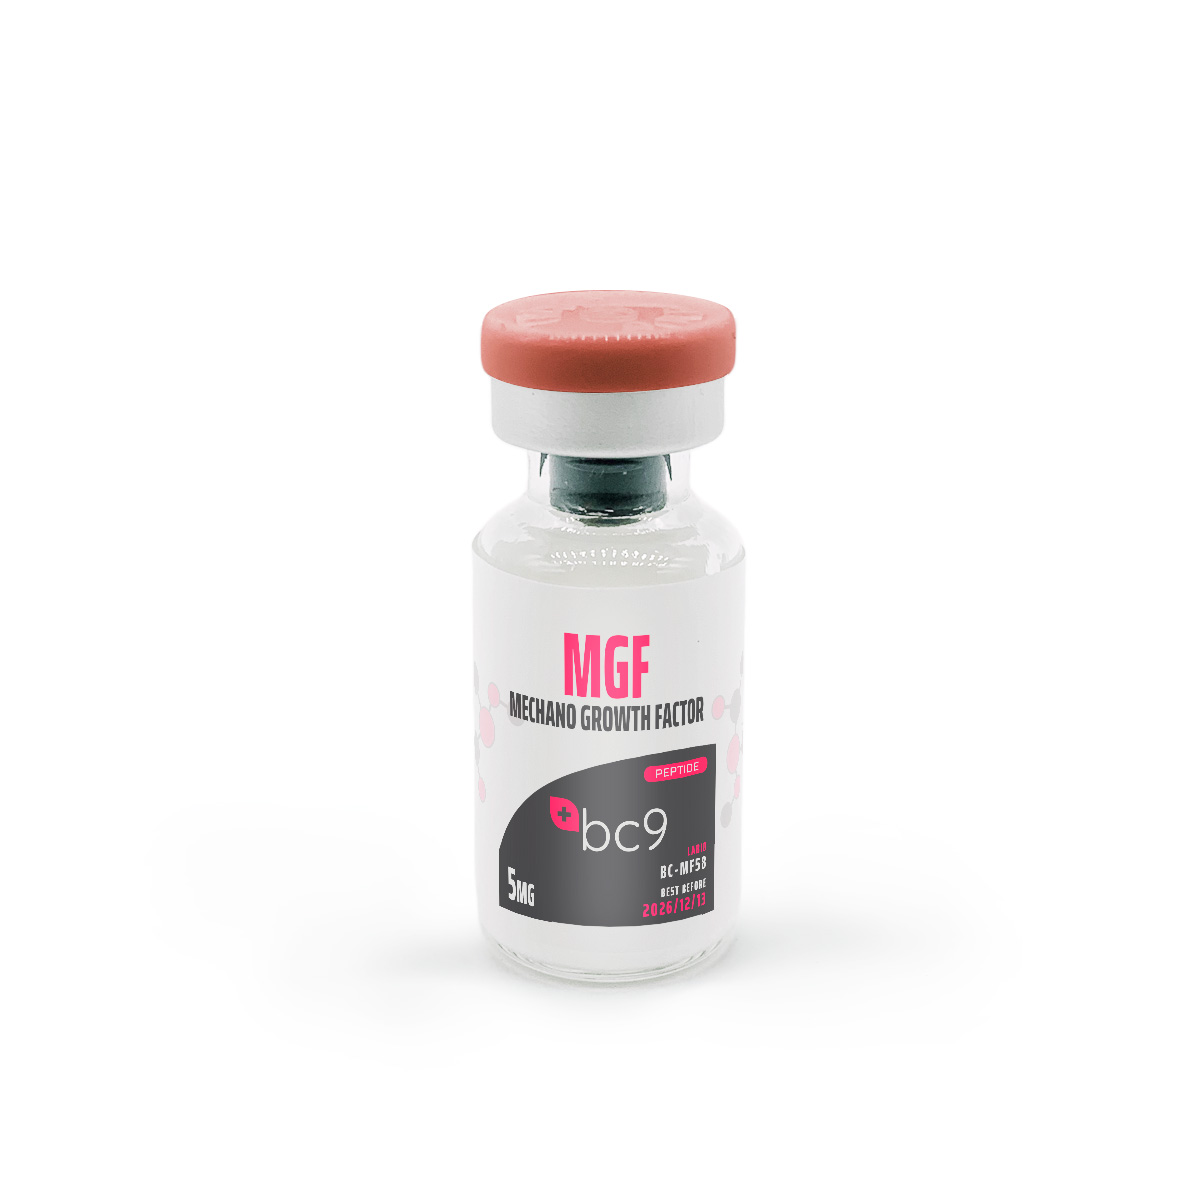 MGF Peptide for Sale | Fast Shipping | BC9.org